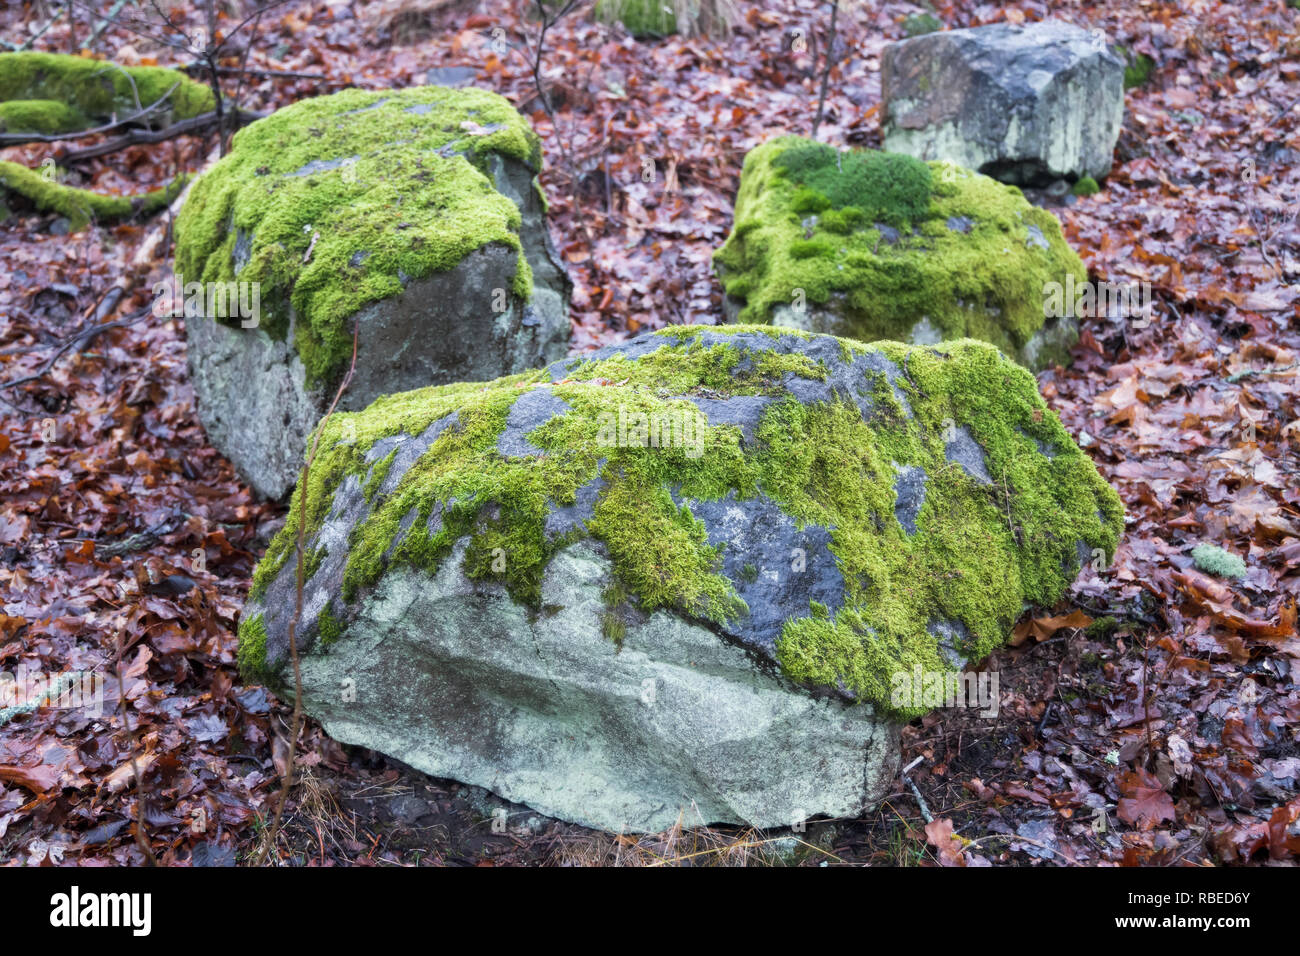 three large rocks covered in moss Stock Photo - Alamy